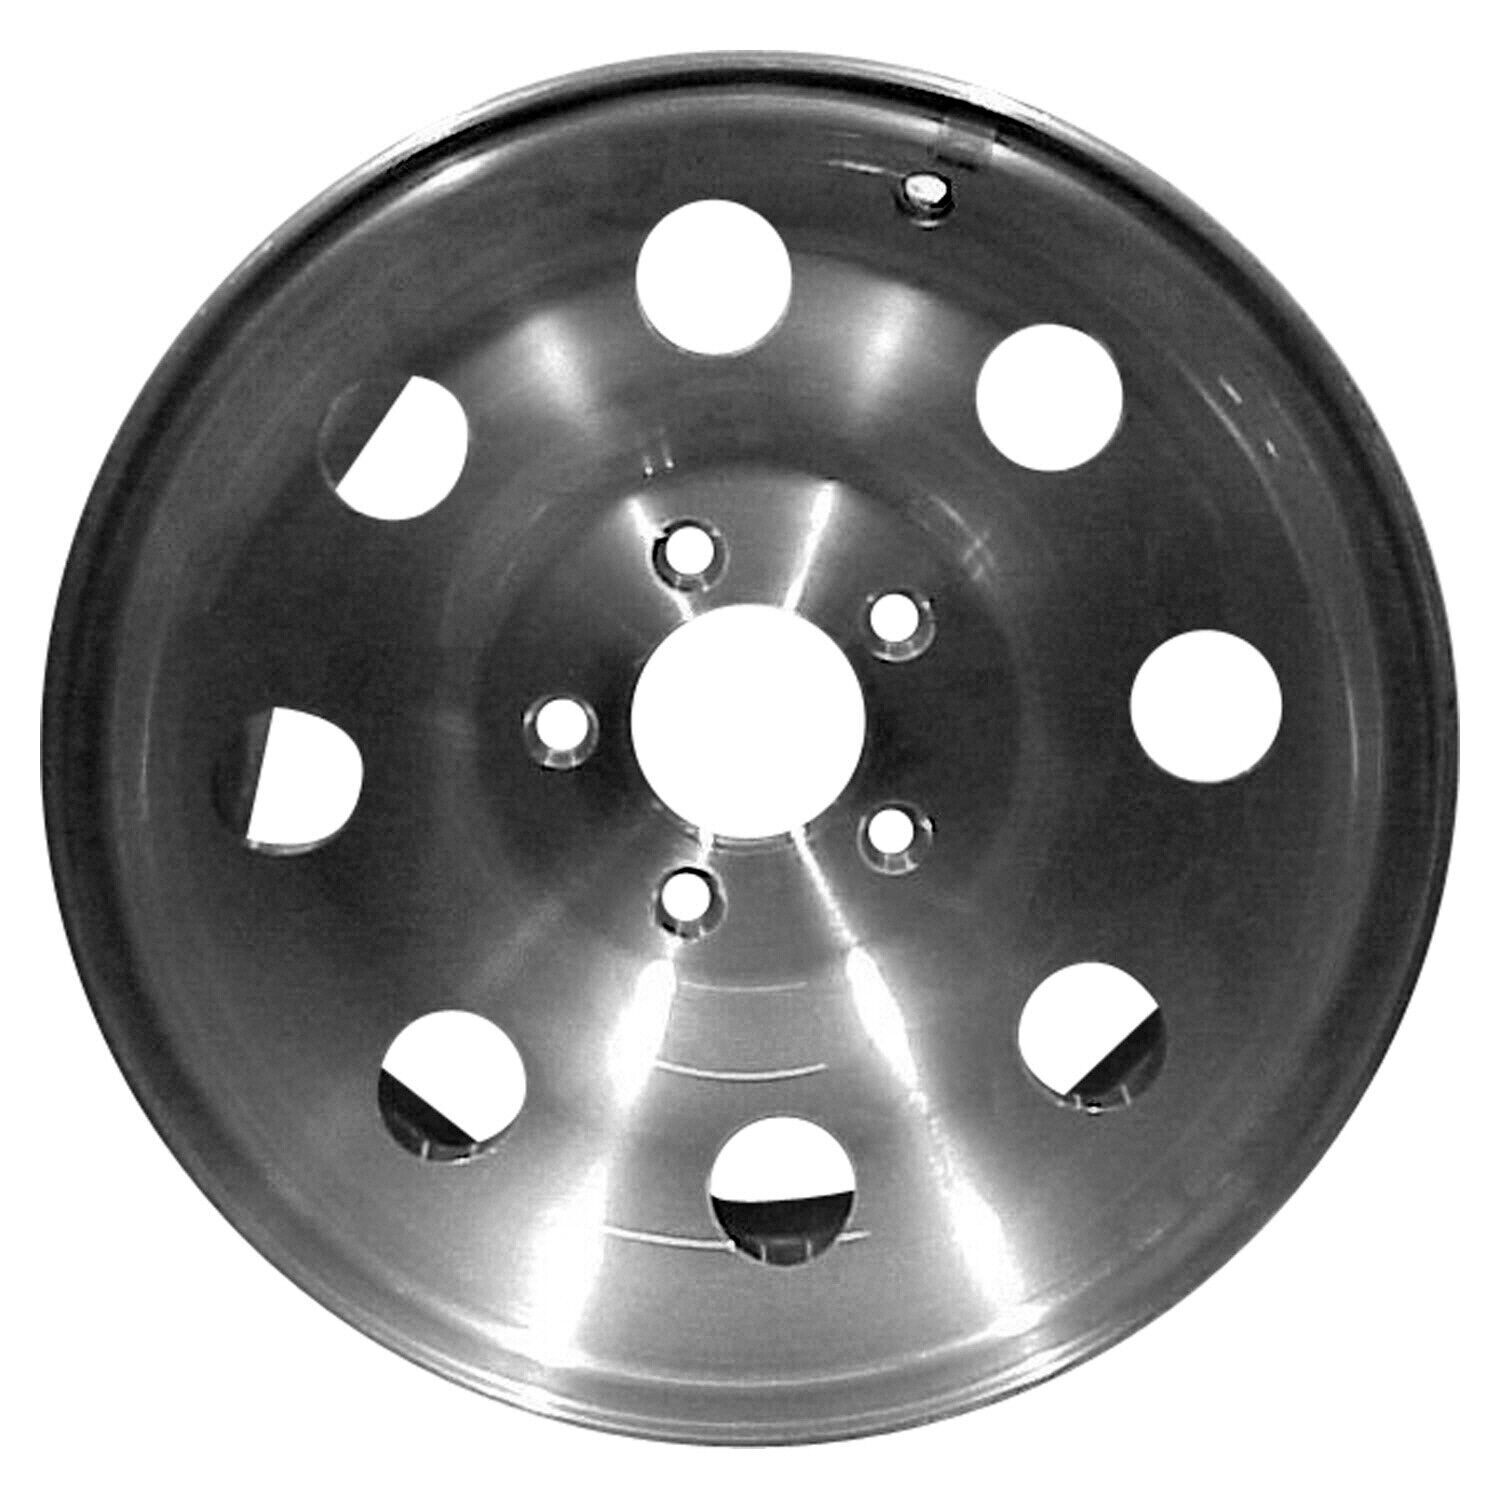 03464 Reconditioned OEM Aluminum Wheel 15x7 fits 2001-2007 Ford Ranger